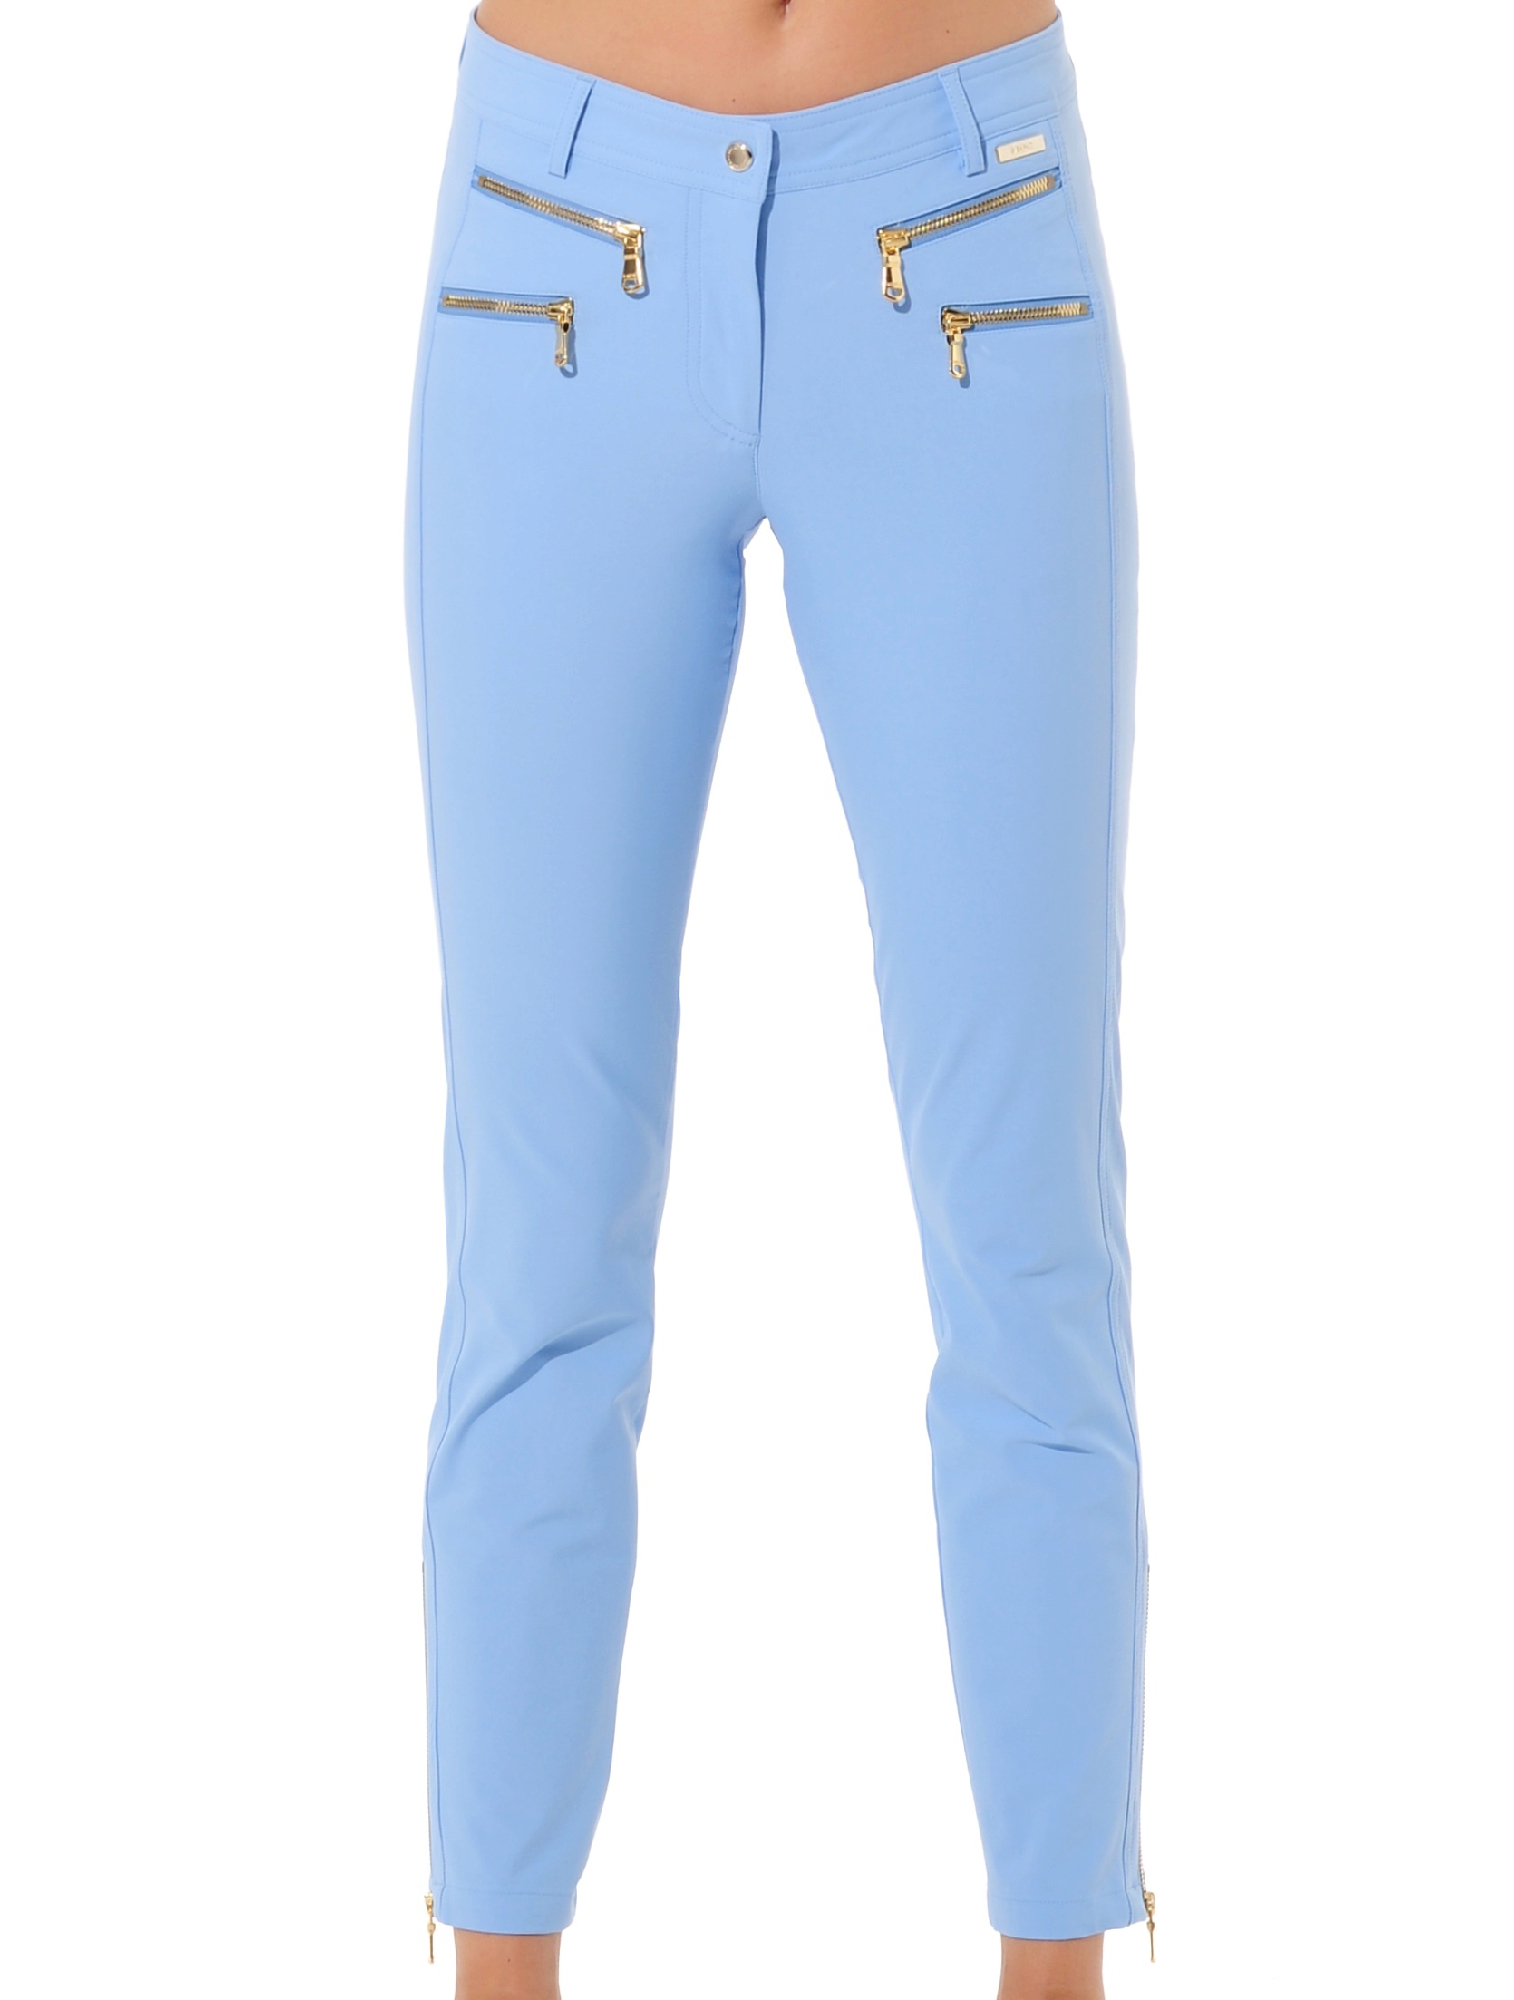 4way stretch shiny gold double zip ankle pants baby blue 